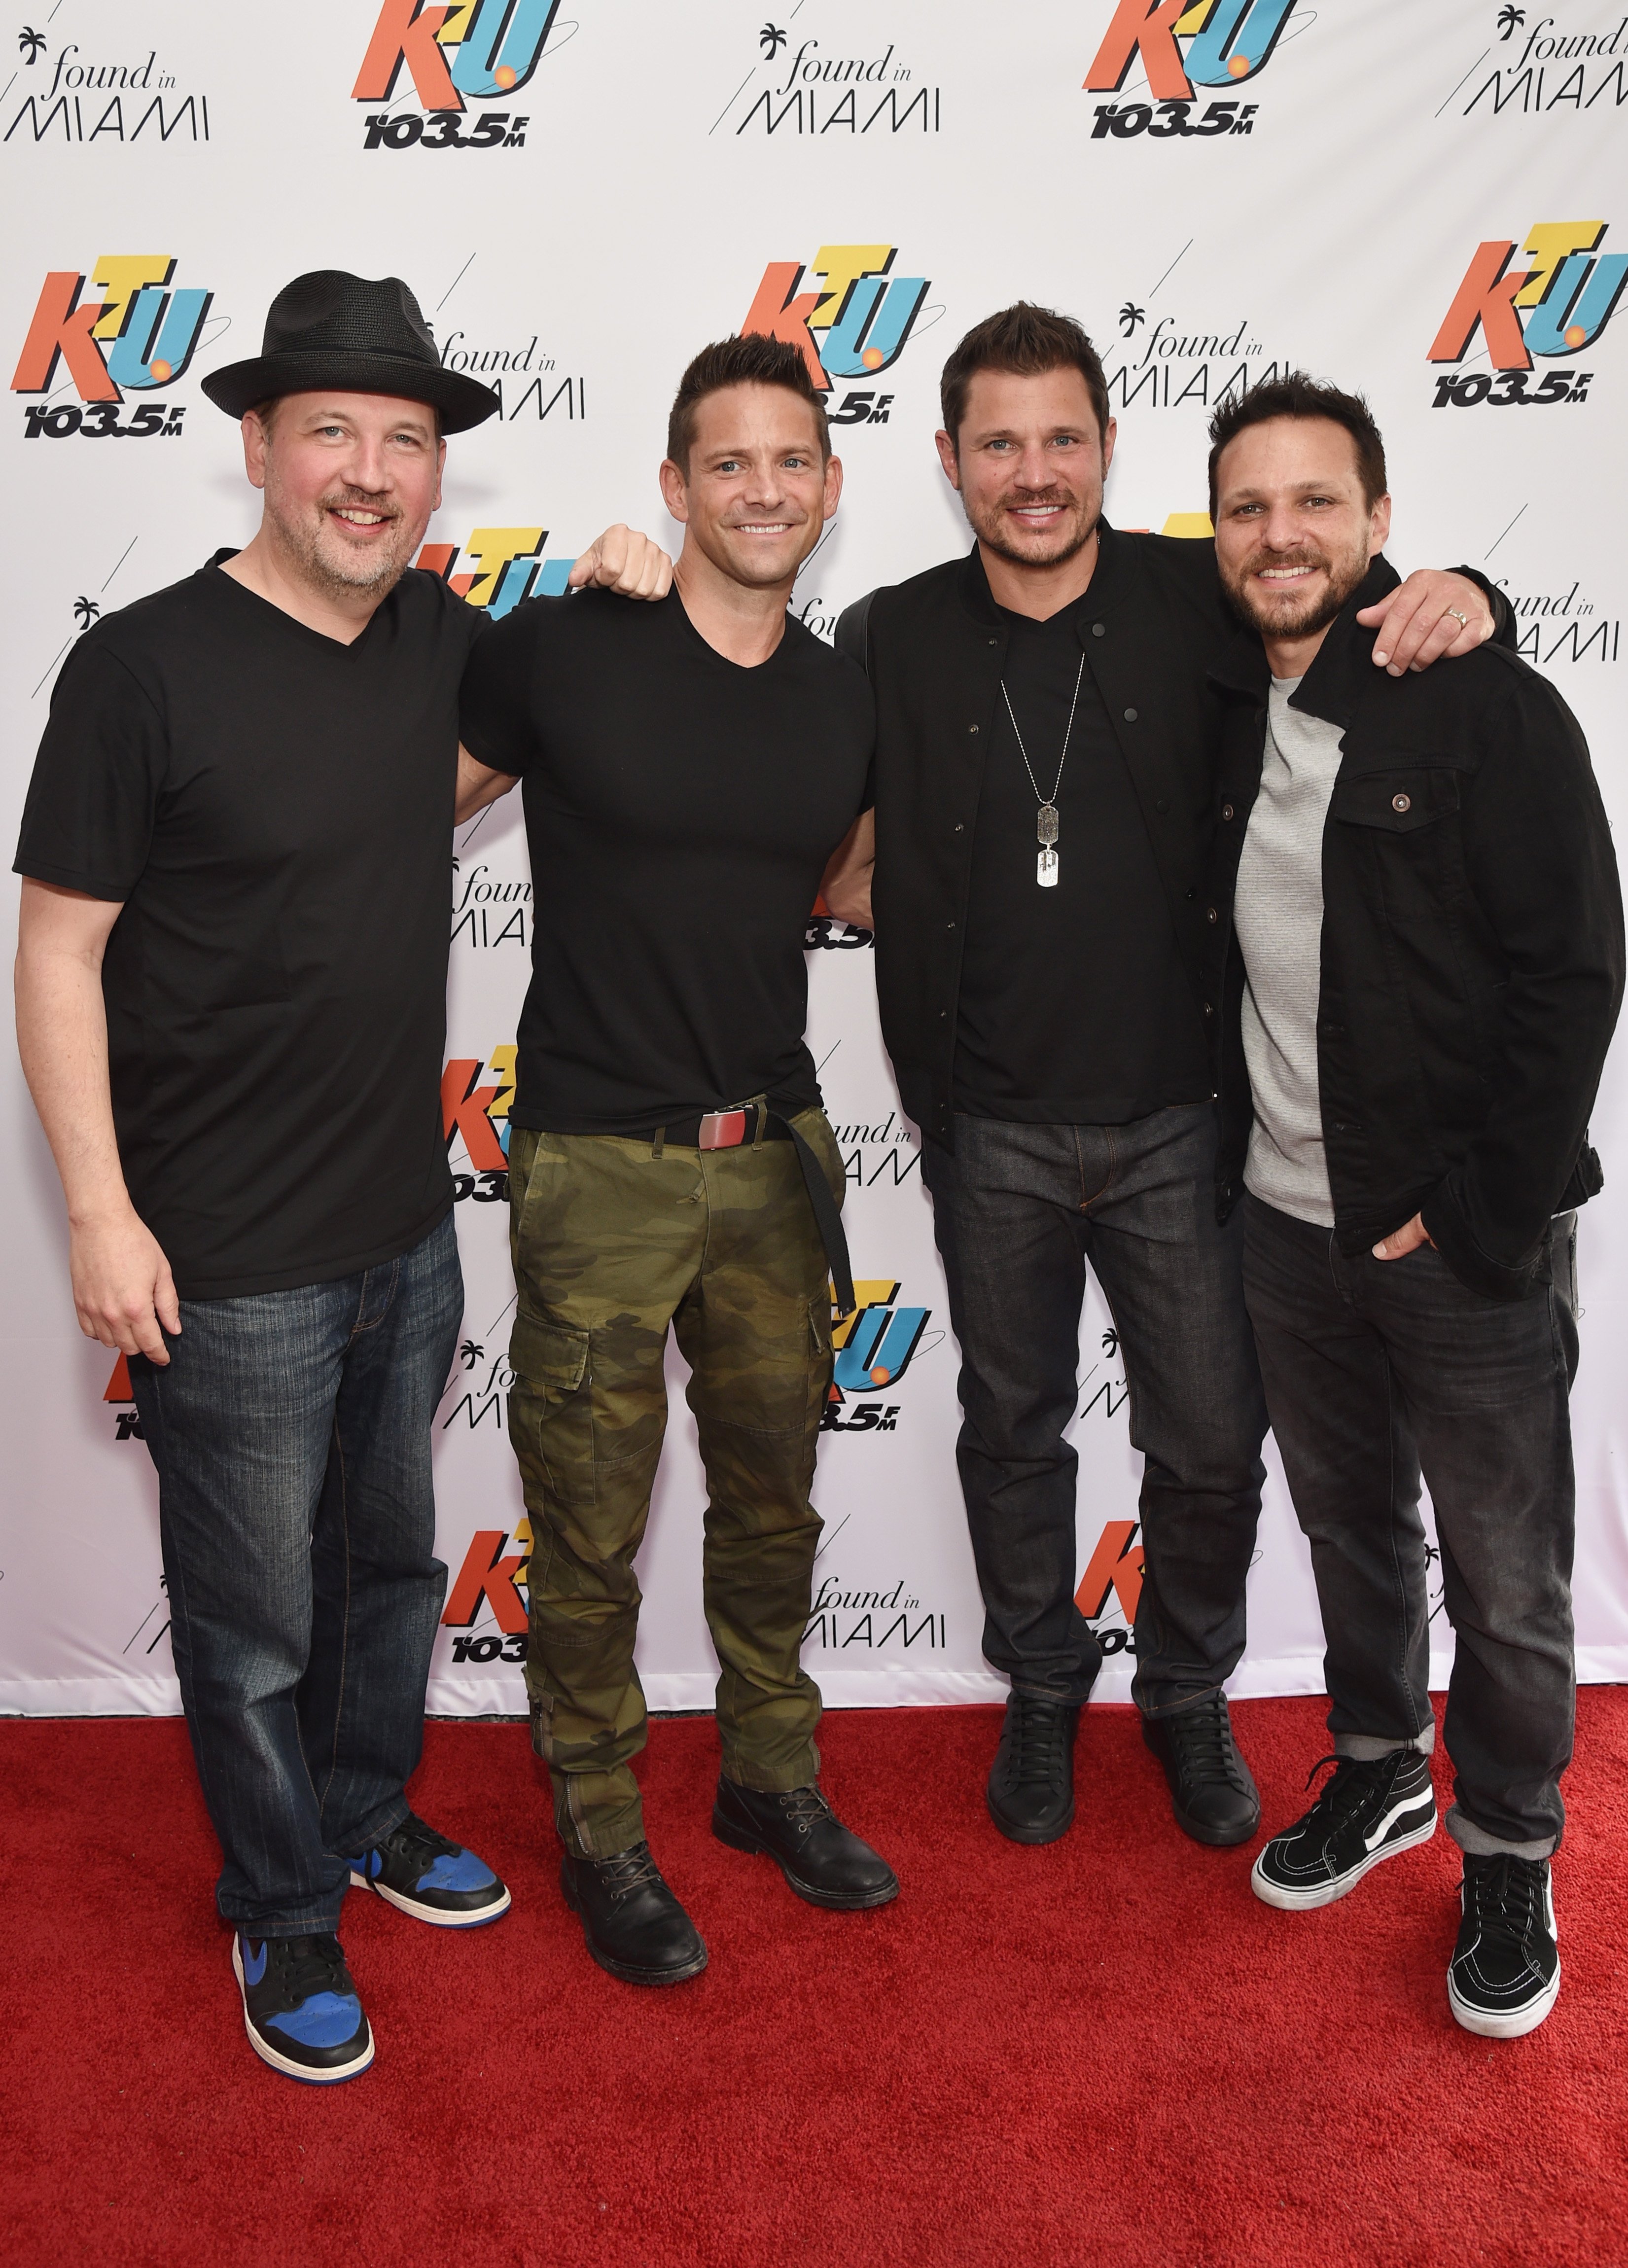 Justin Jeffre, Jeff Timmons, Nick Lachey and Drew Lachey of 98 Degrees attend 103.5 KTU's KTUphoria on June 16, 2018, in Wantagh City. | Source: Getty Images.